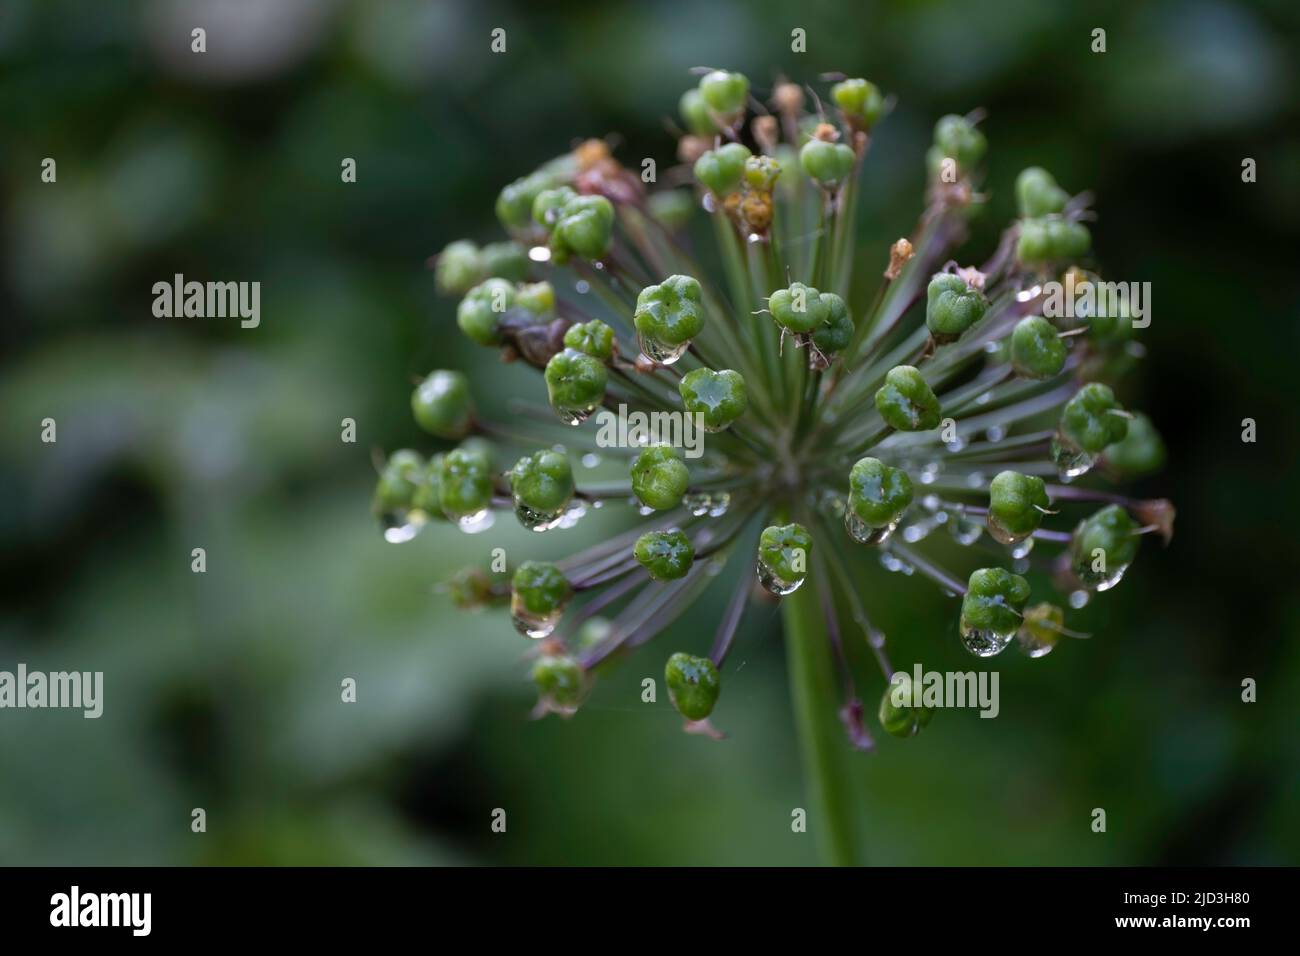 Macro of budding onion Allium flower with water drops after a rainstorm in a garden on green blurred background in spring Stock Photo